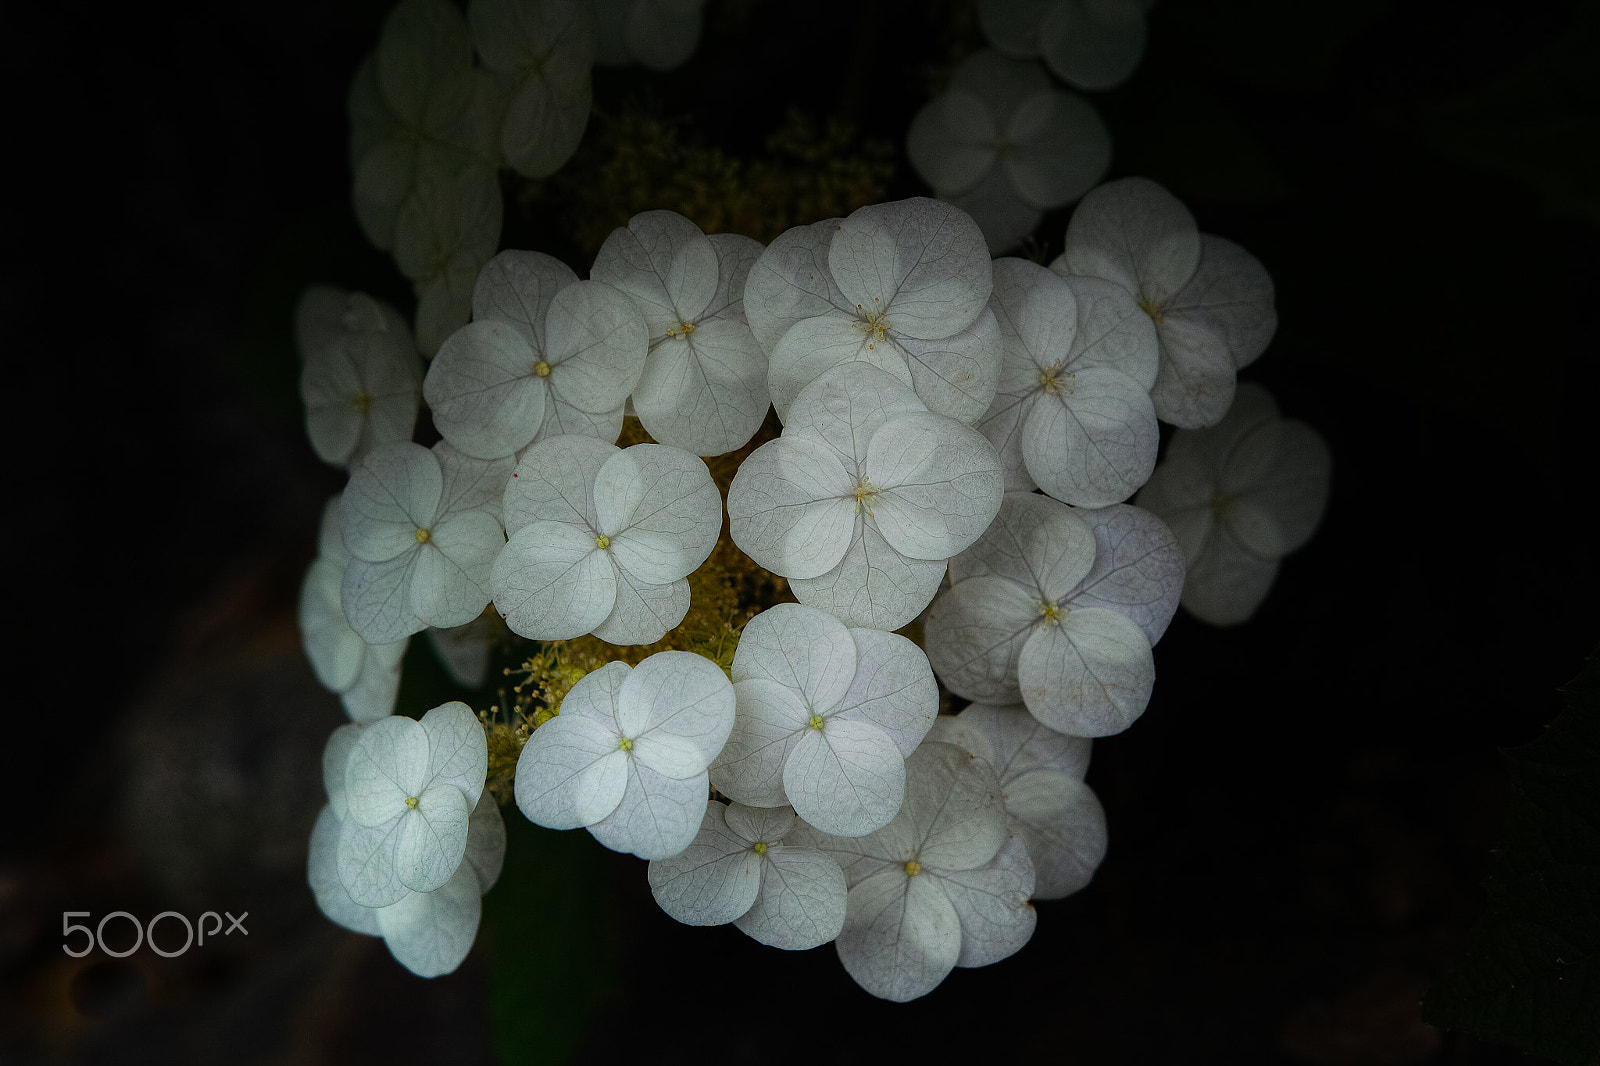 Sigma SD1 sample photo. Flowers in the flower photography